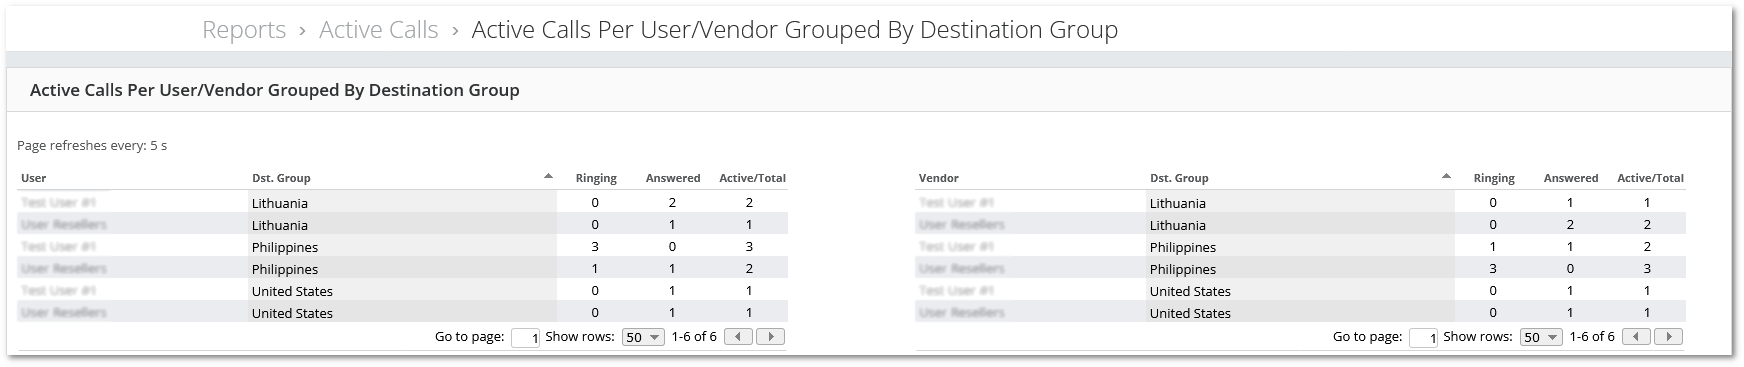 Active Calls per User Vendor Grouped By Destination Group.png